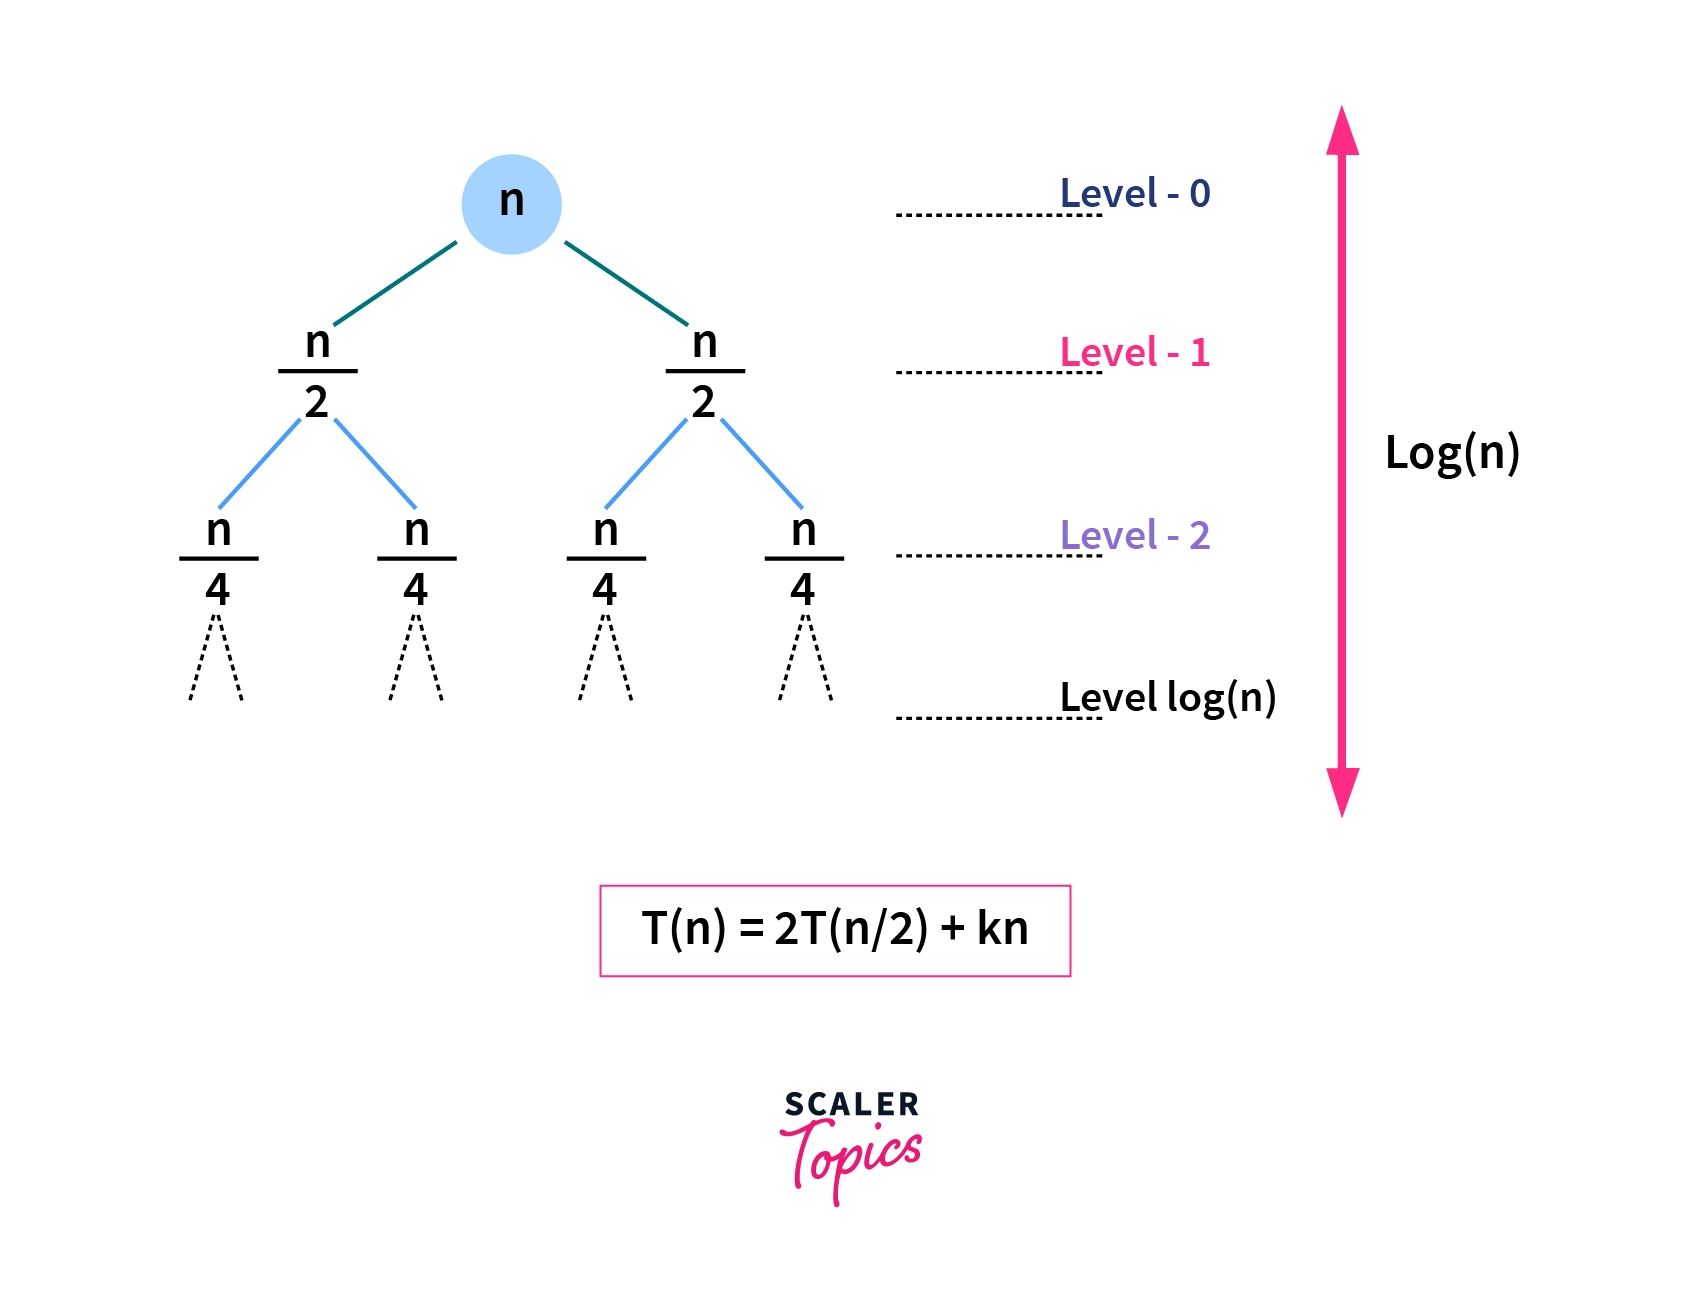 recursion tree for the recurrence relation